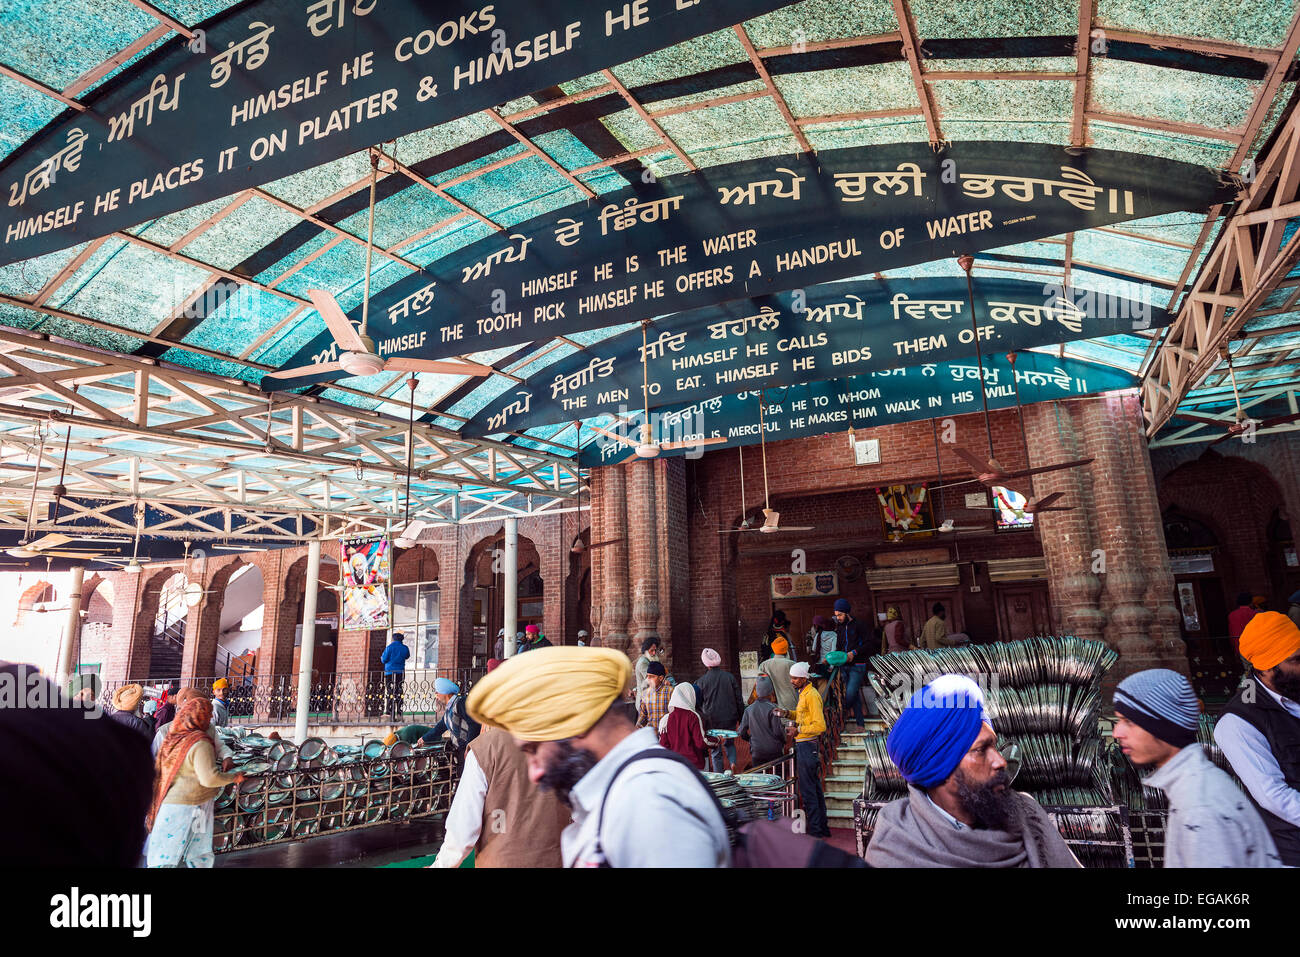 Exit from the communal dining room of The Golden Temple, Amritsar, Punjab, India Stock Photo